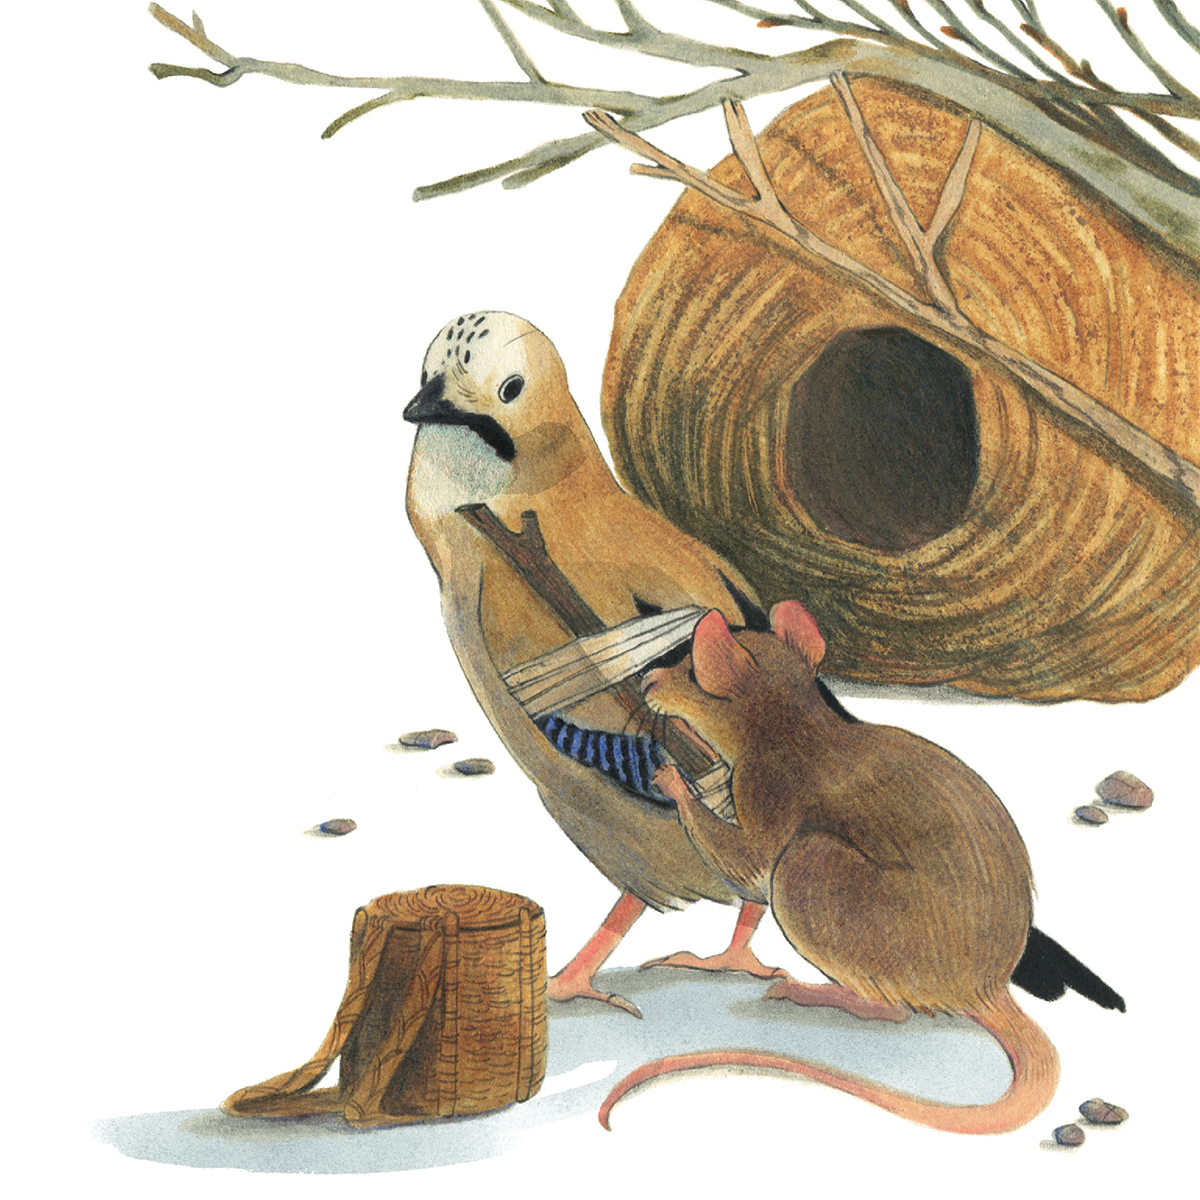 Image. A mouse applying a twig splint to a birds broken wing.